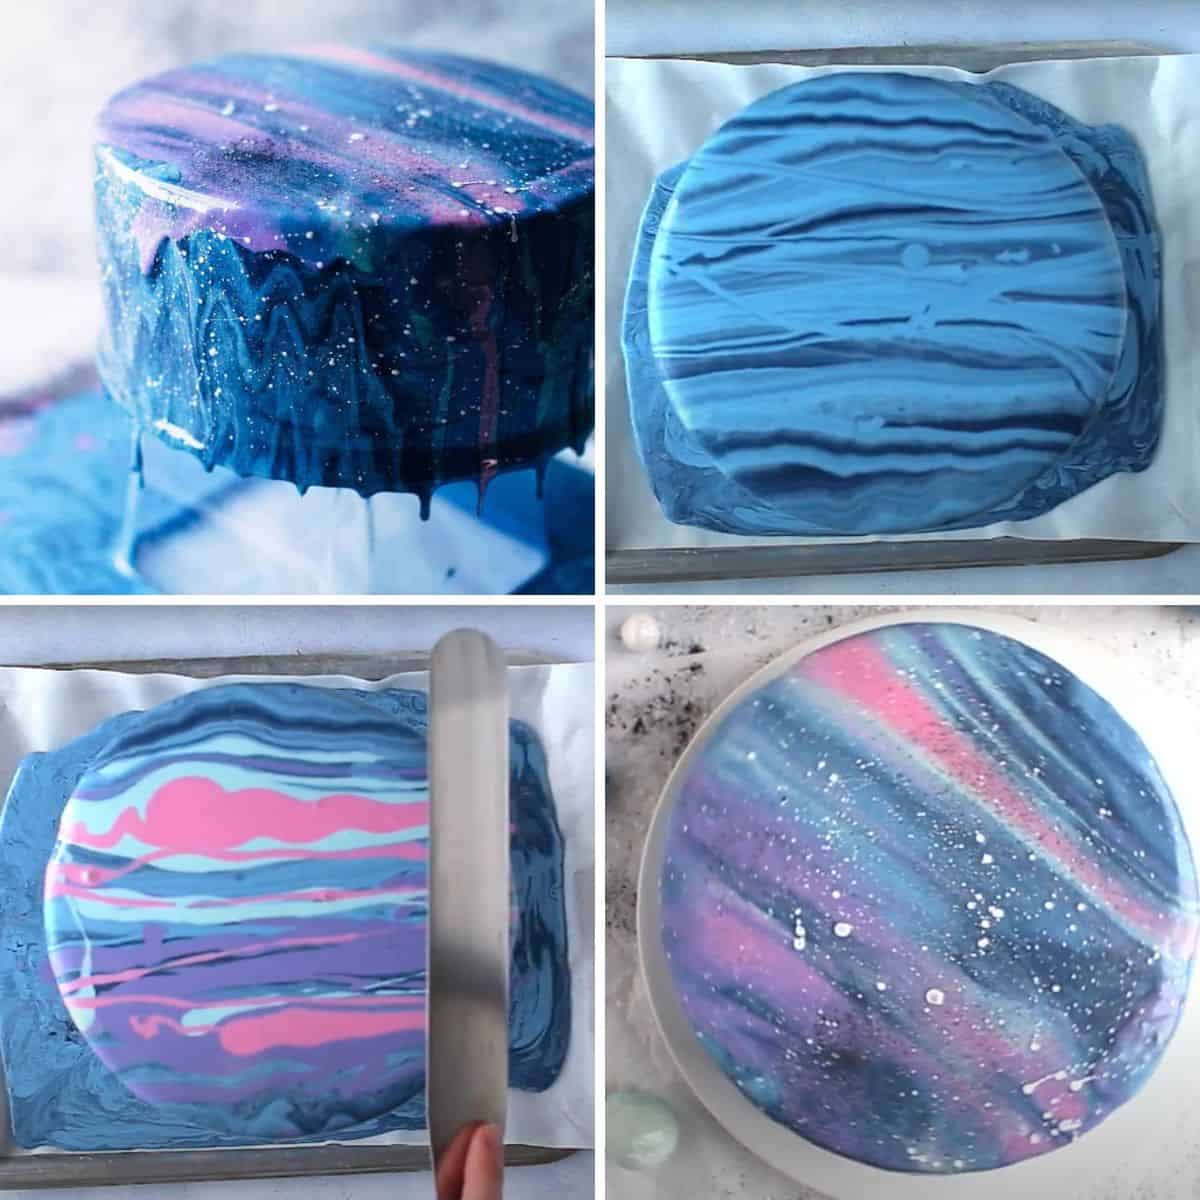 A collage showing adding the mirror glaze to the cake.